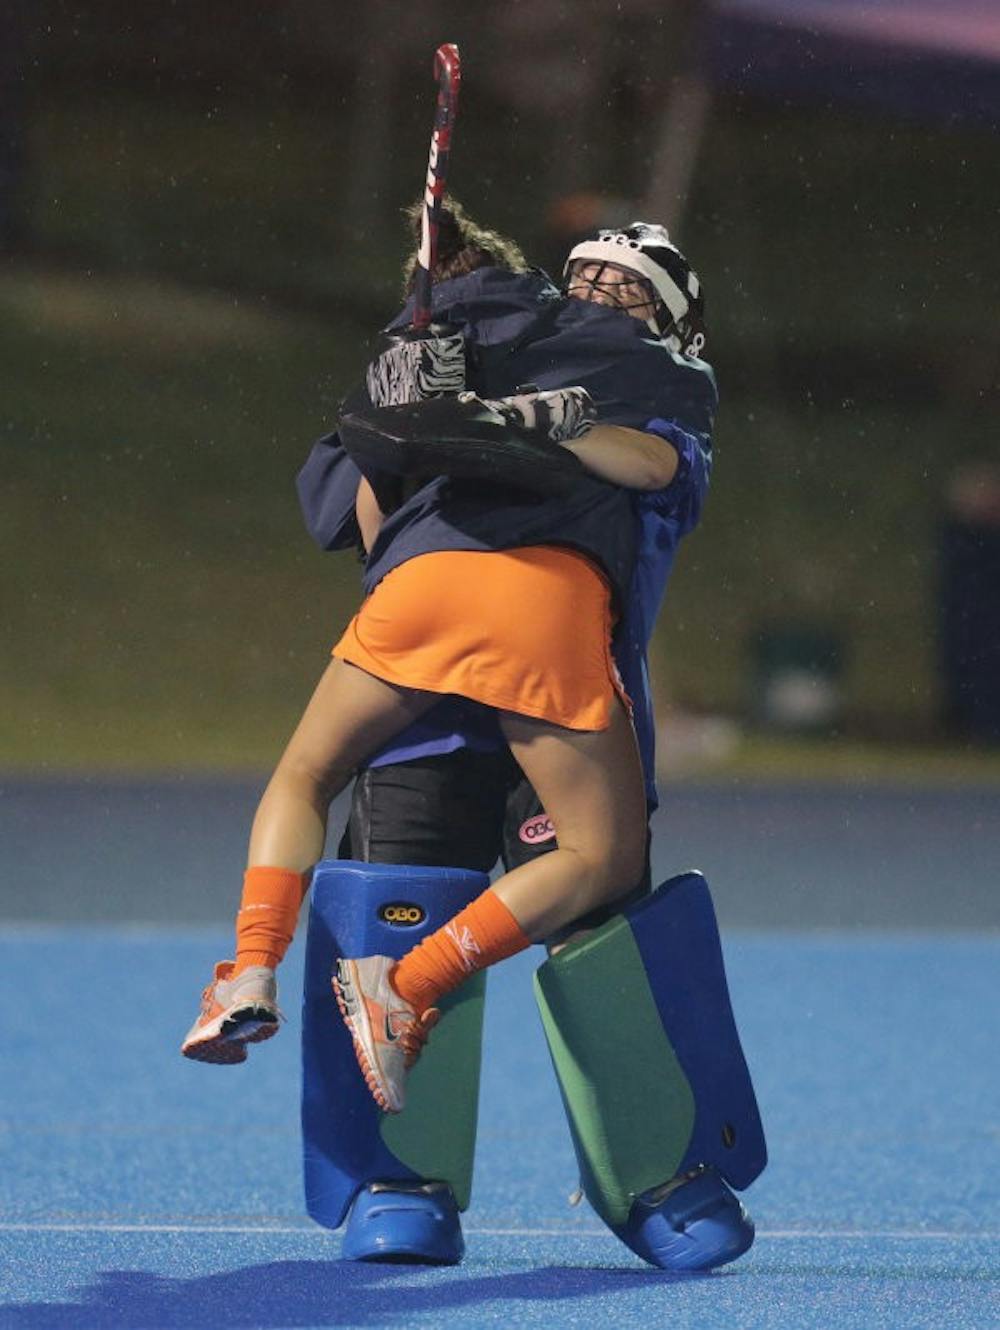 <p>The photo described by LeBlanc and Johnstone from their 2012 win against Maryland.</p>